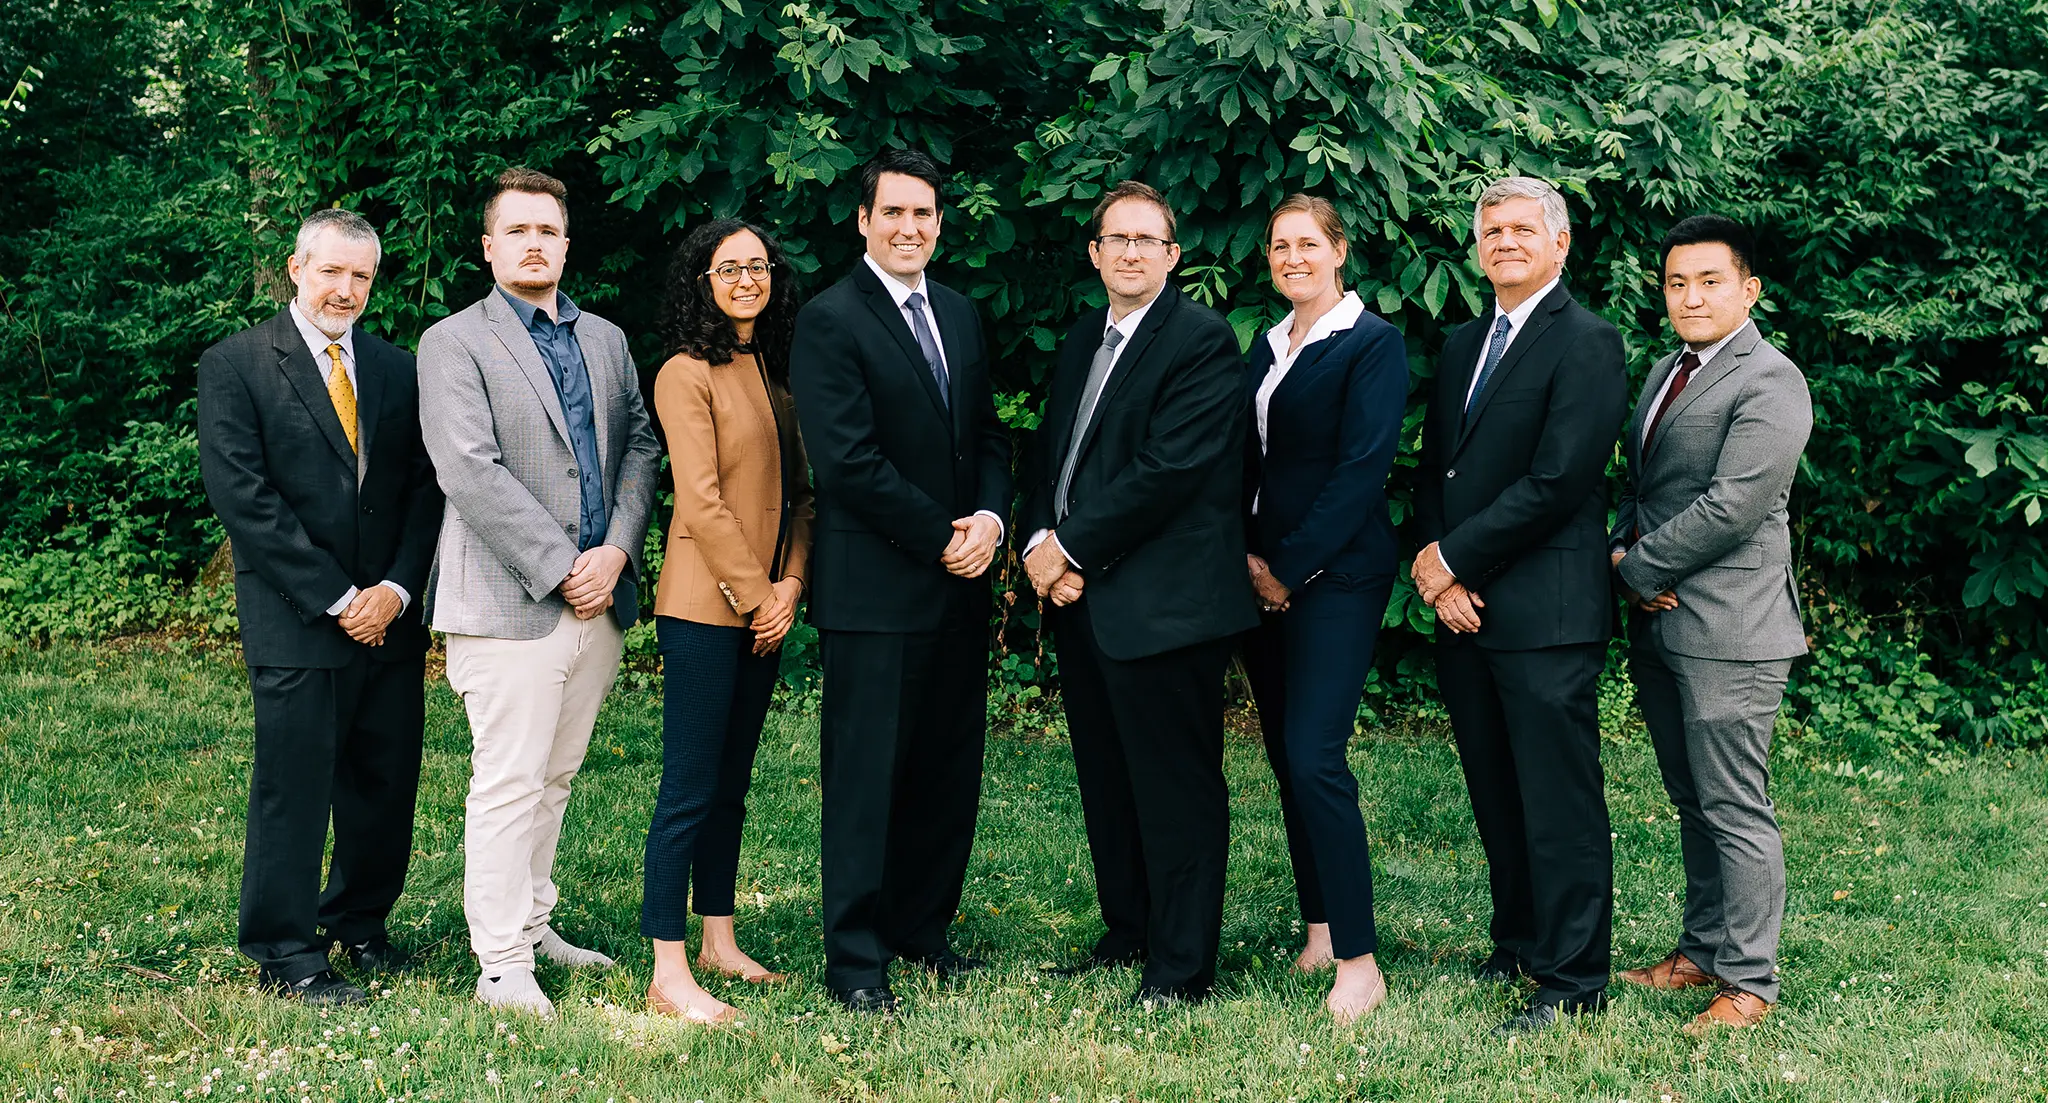 A photo of 8 of the attorneys from Cornerstone Law Firm